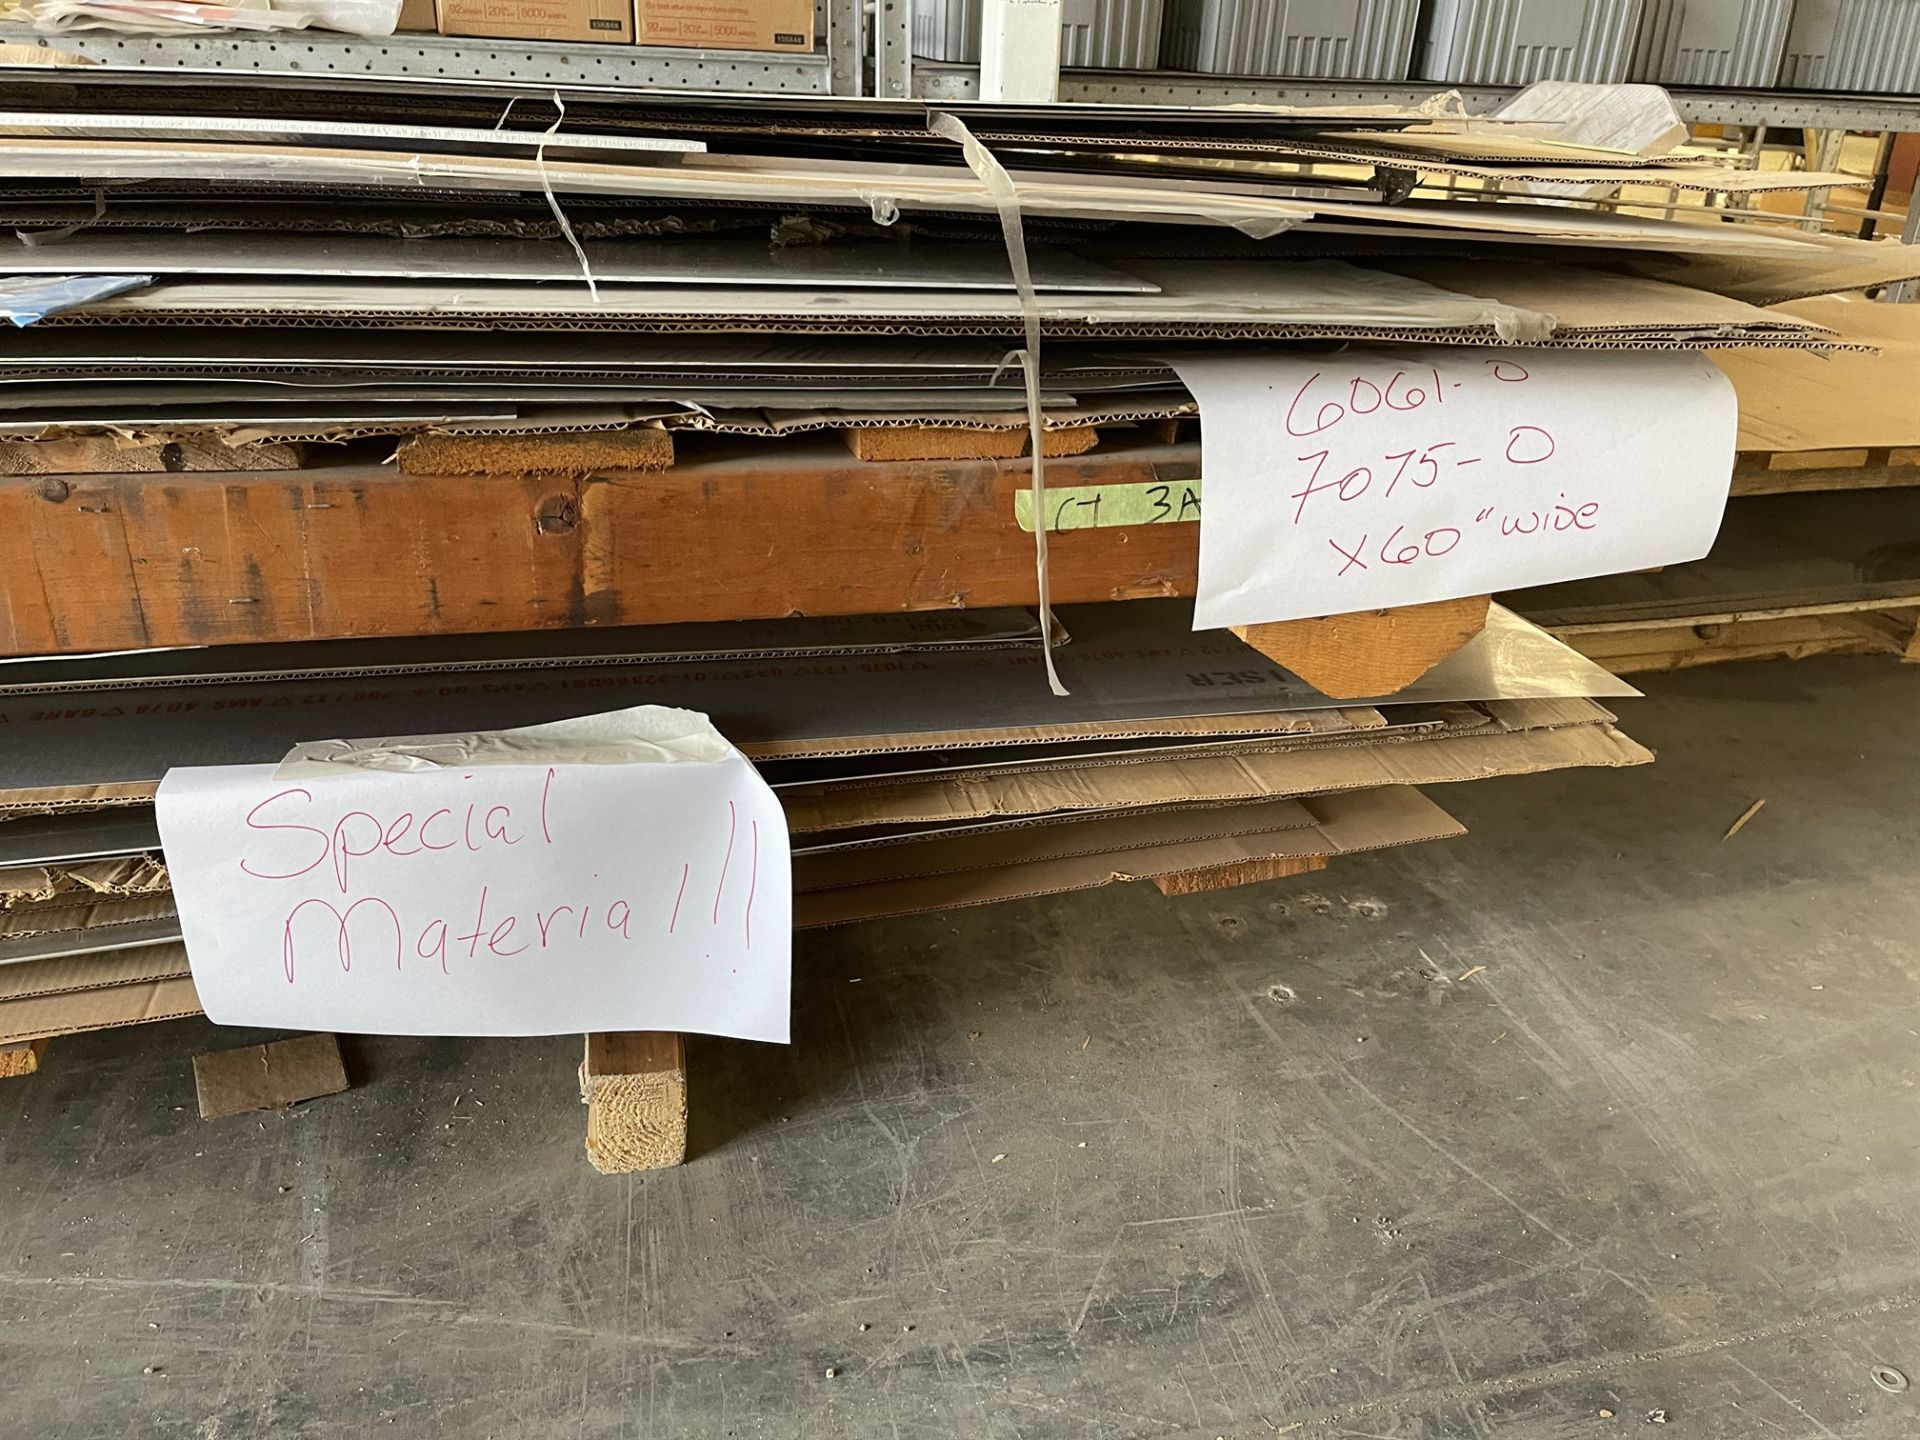 Lot Comprising Stack of Assorted Specialty Aluminum Sheet Stock, Including 2024-T81, 7475-T761, - Image 4 of 5